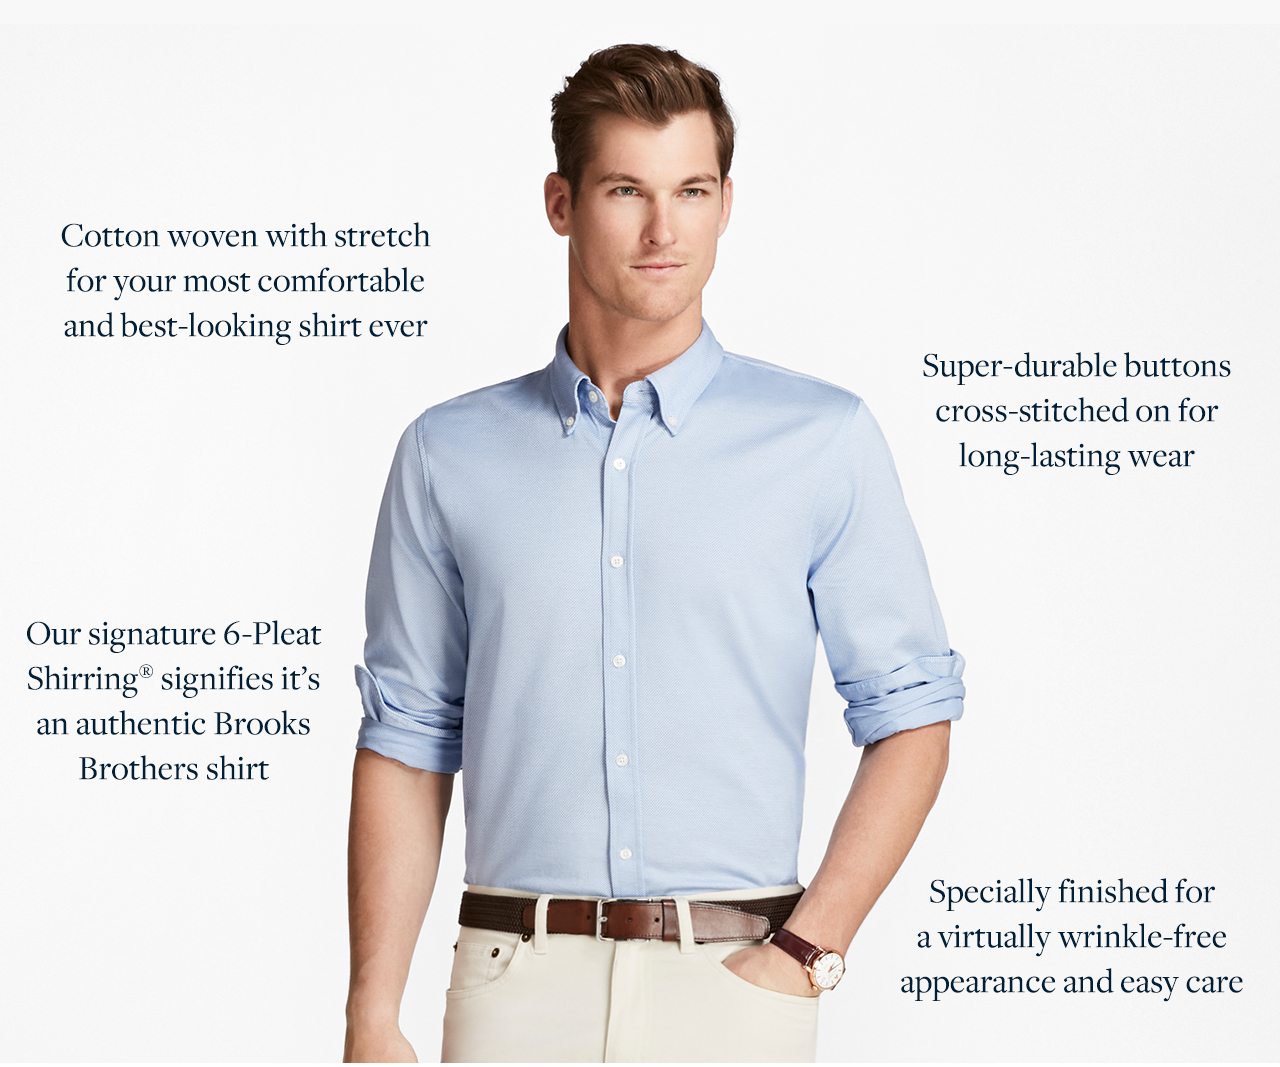 Cotton woven with stretch for your most comfortable and best-looking shirt ever. Our signature 6-Pleat Shirring signifies it's an authentic Brooks Brothers shirt. Super-durable buttons cross-stitched on for long-lasting wear. Specially finished for a virtually wrinkle-free appearance and easy care.